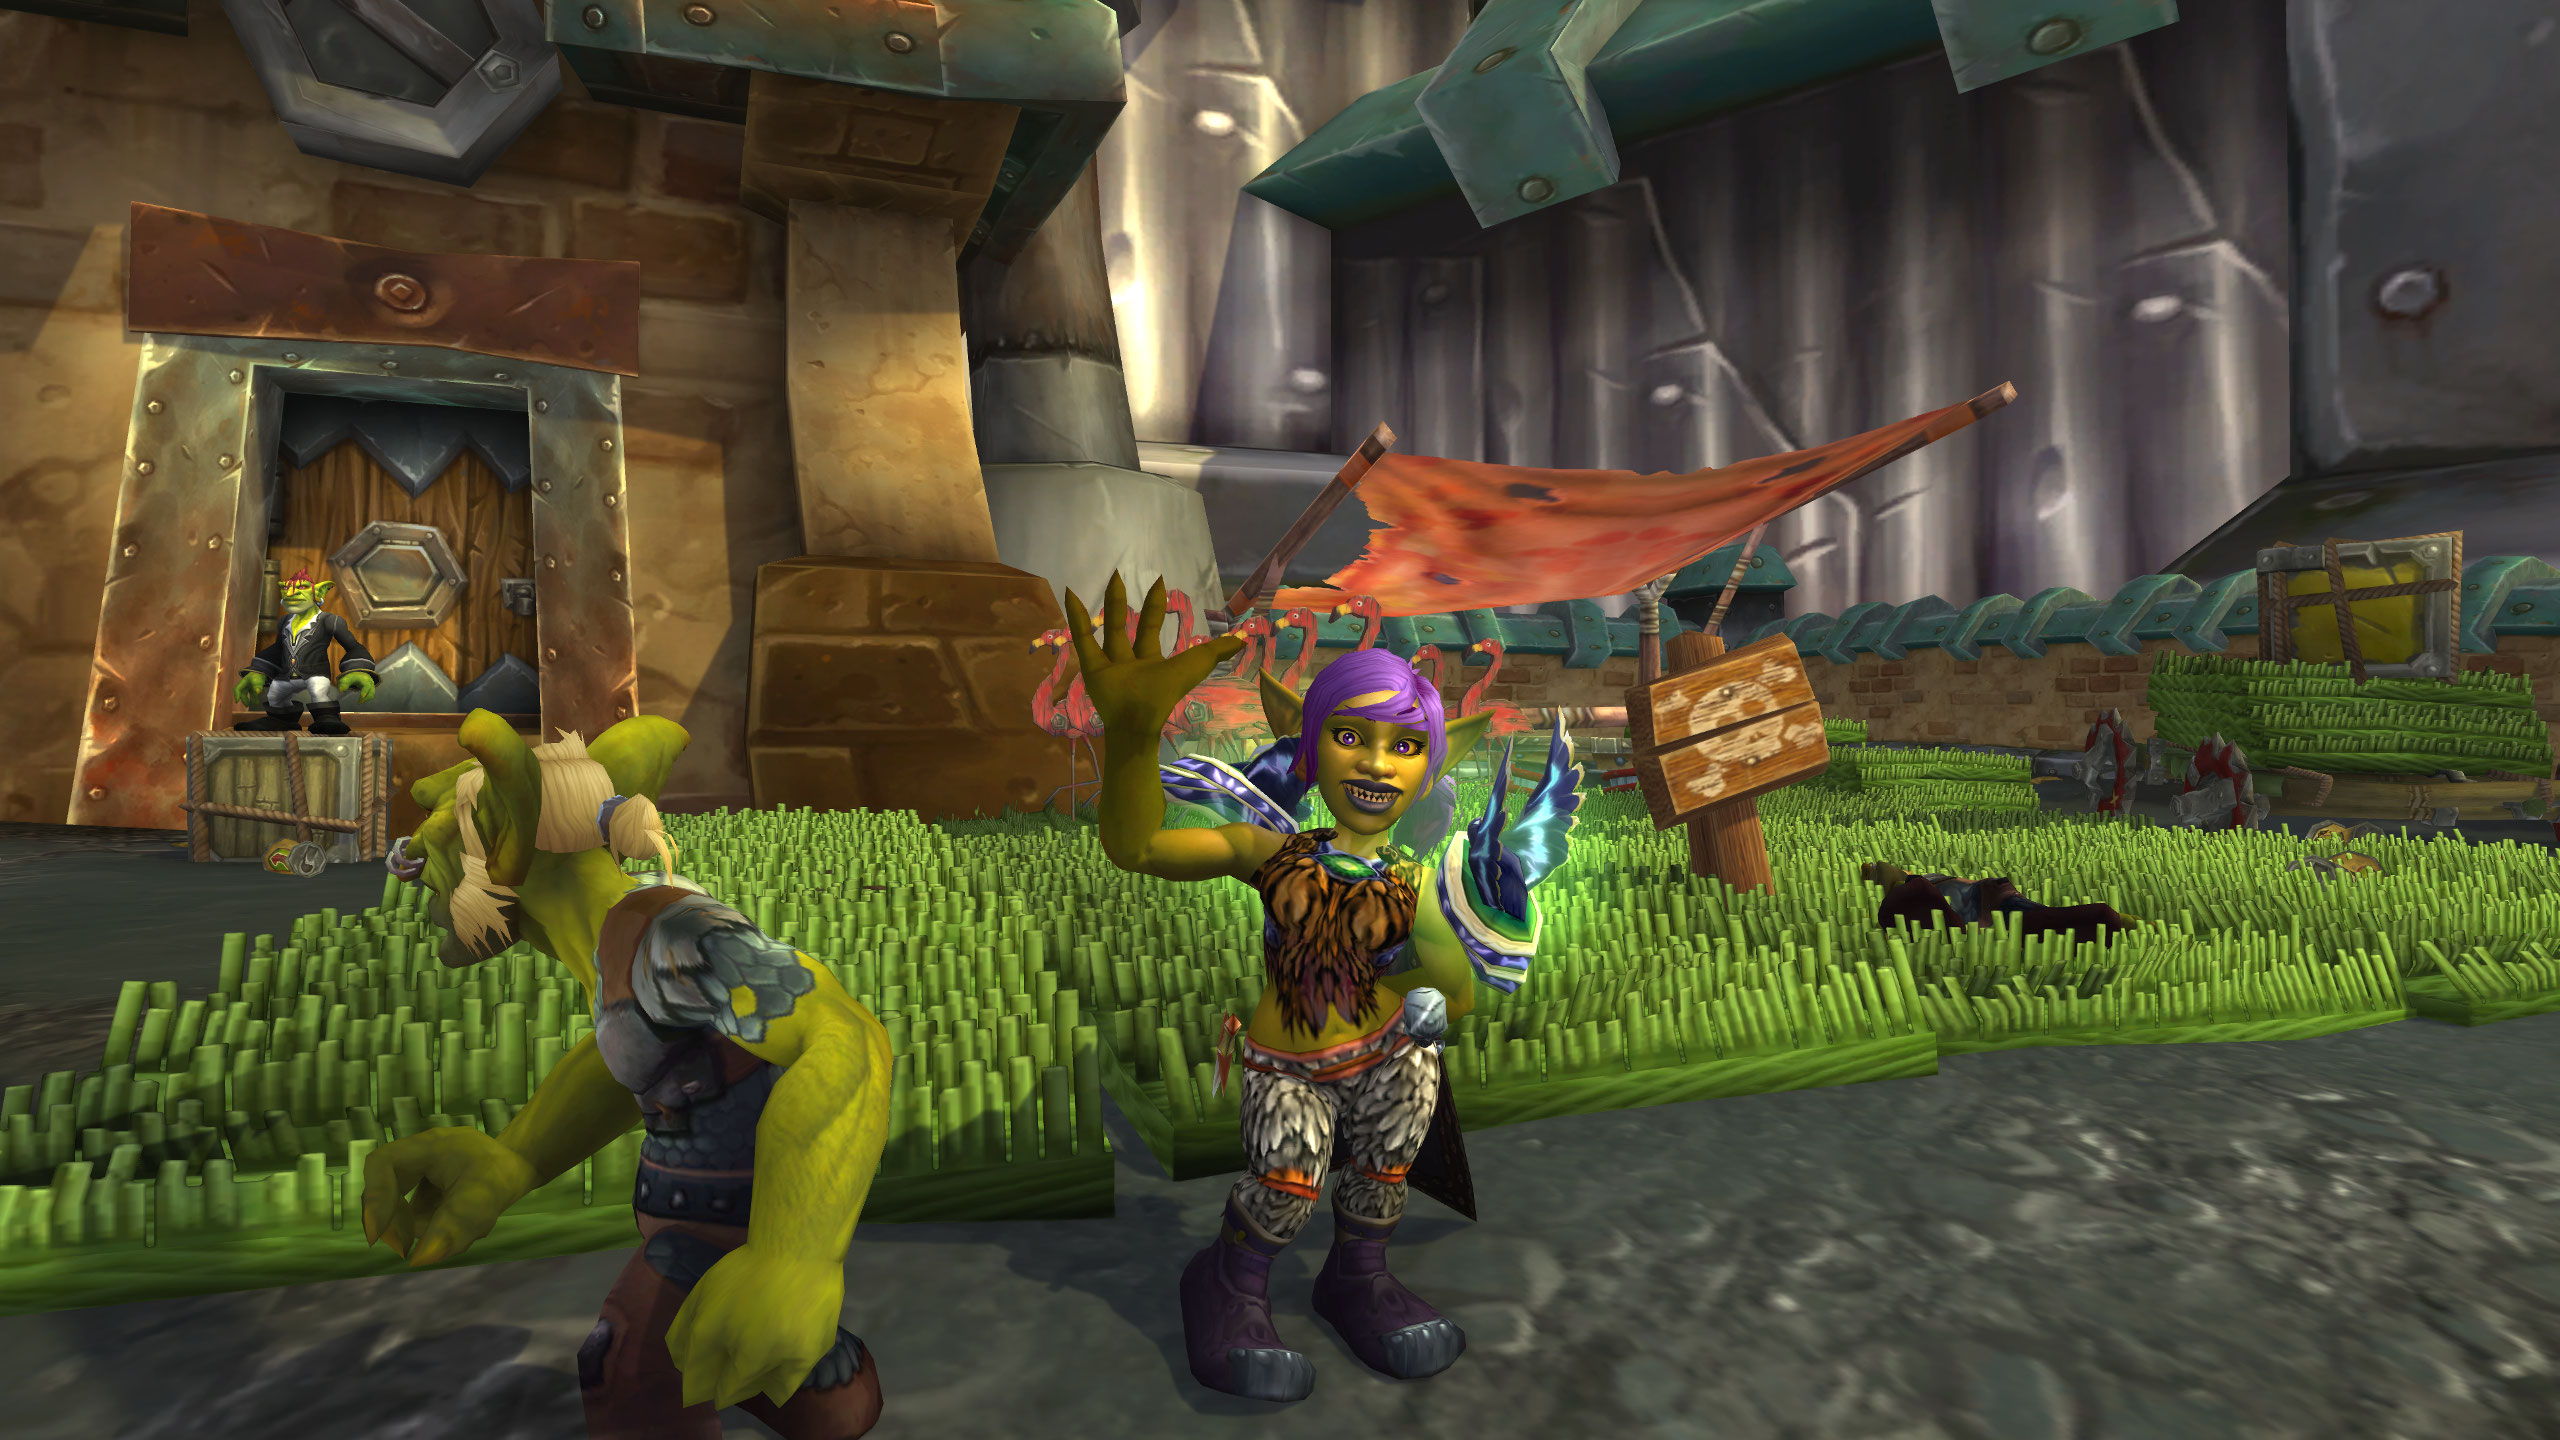 Welcome to the World of warcraft, Kezan Goblin Rogue